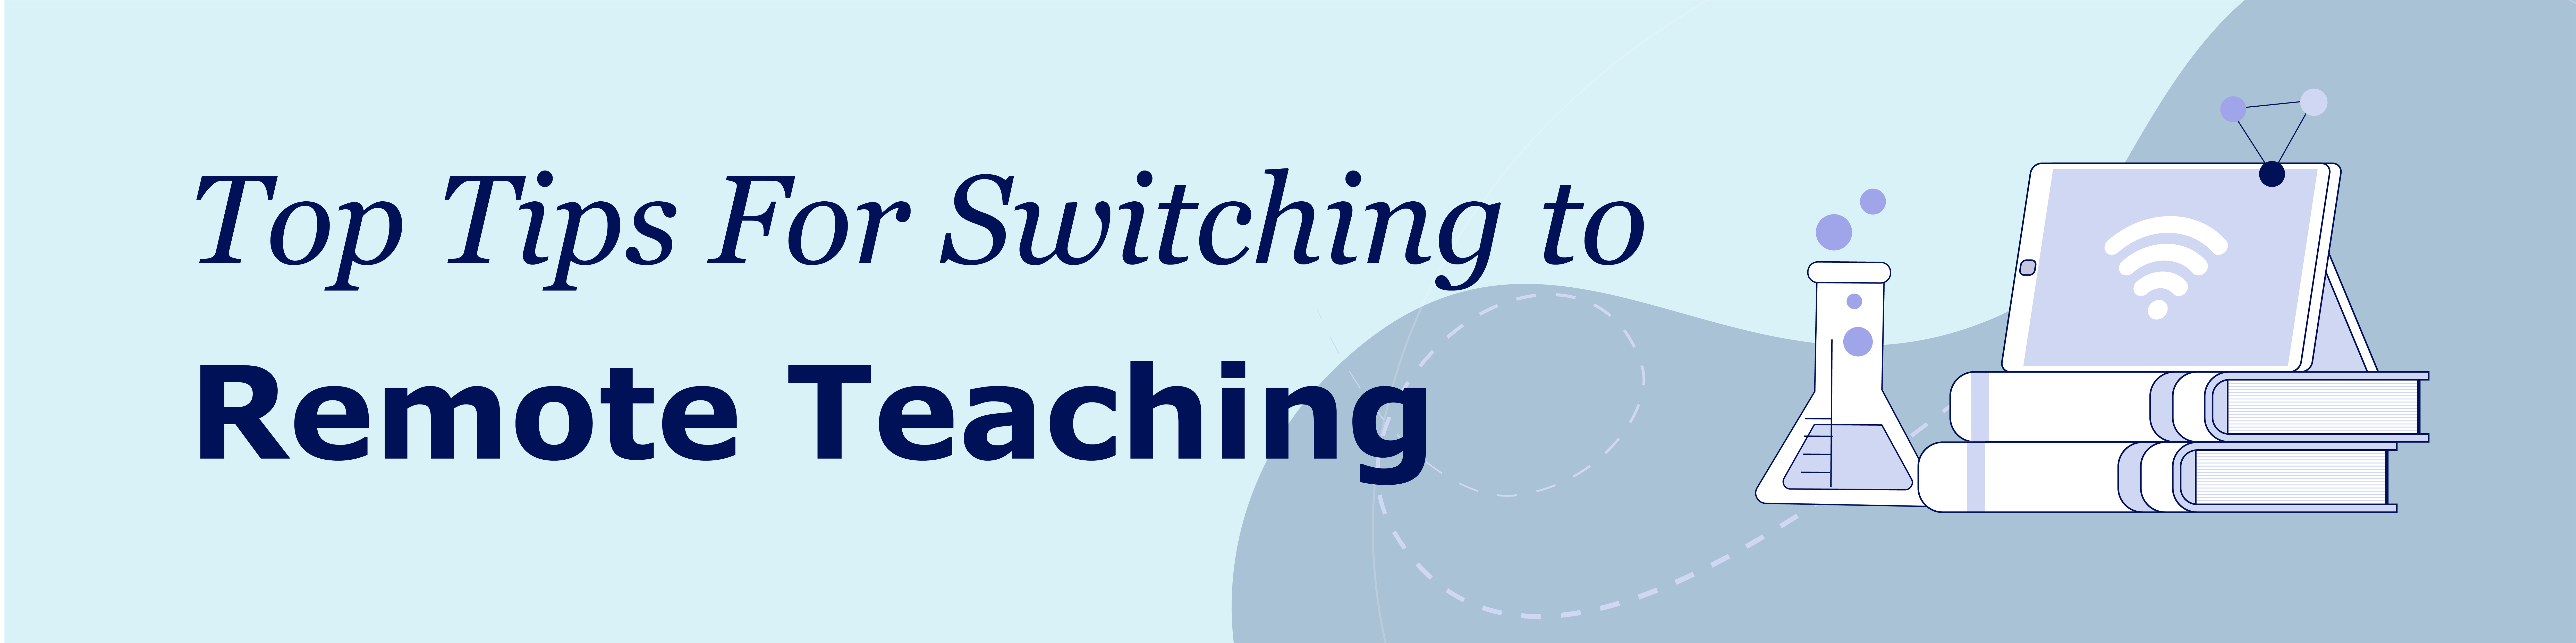 Top Tips for Switching to Remote Teaching